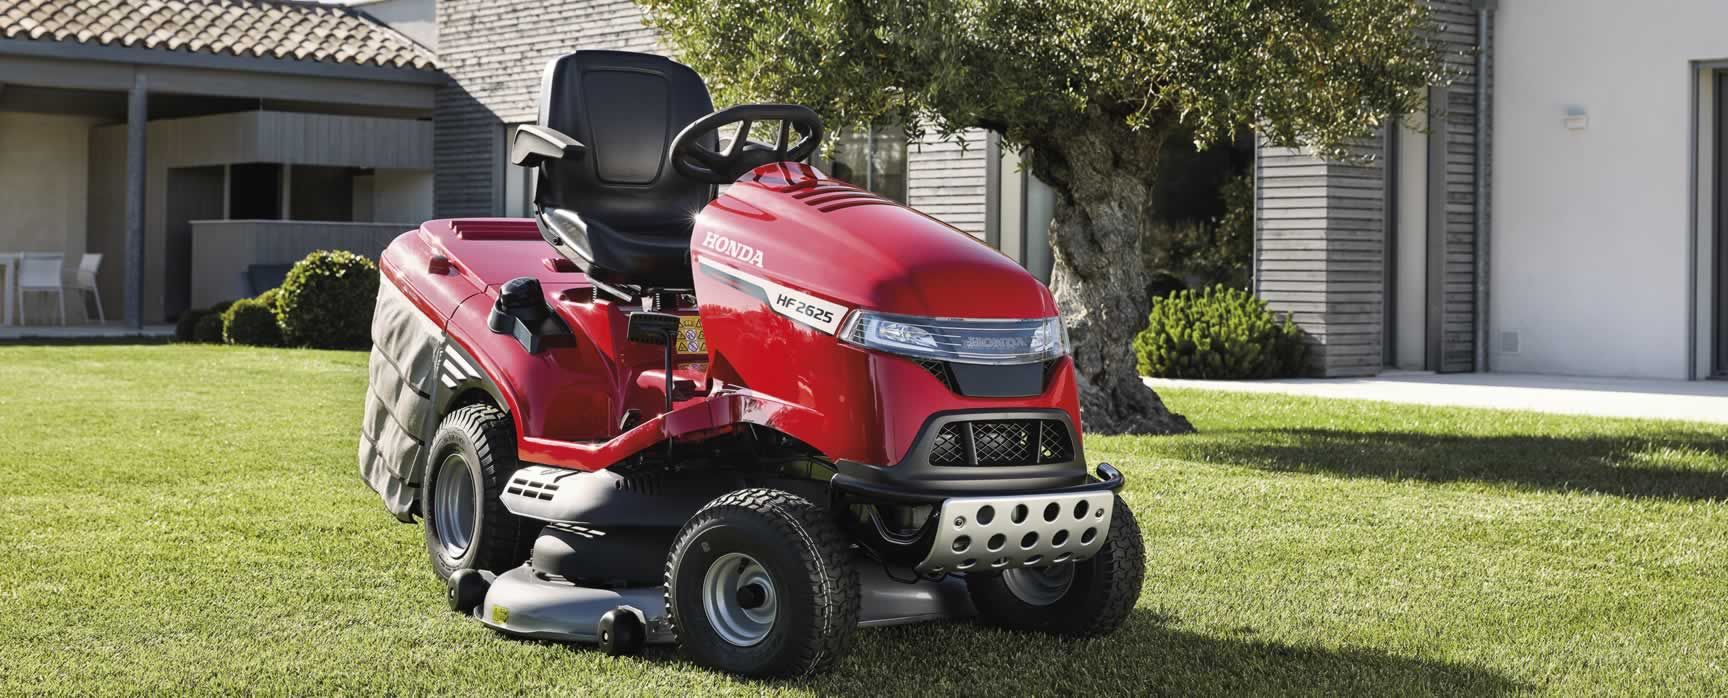 Most Trusted Lawn Mower Brands - Honda